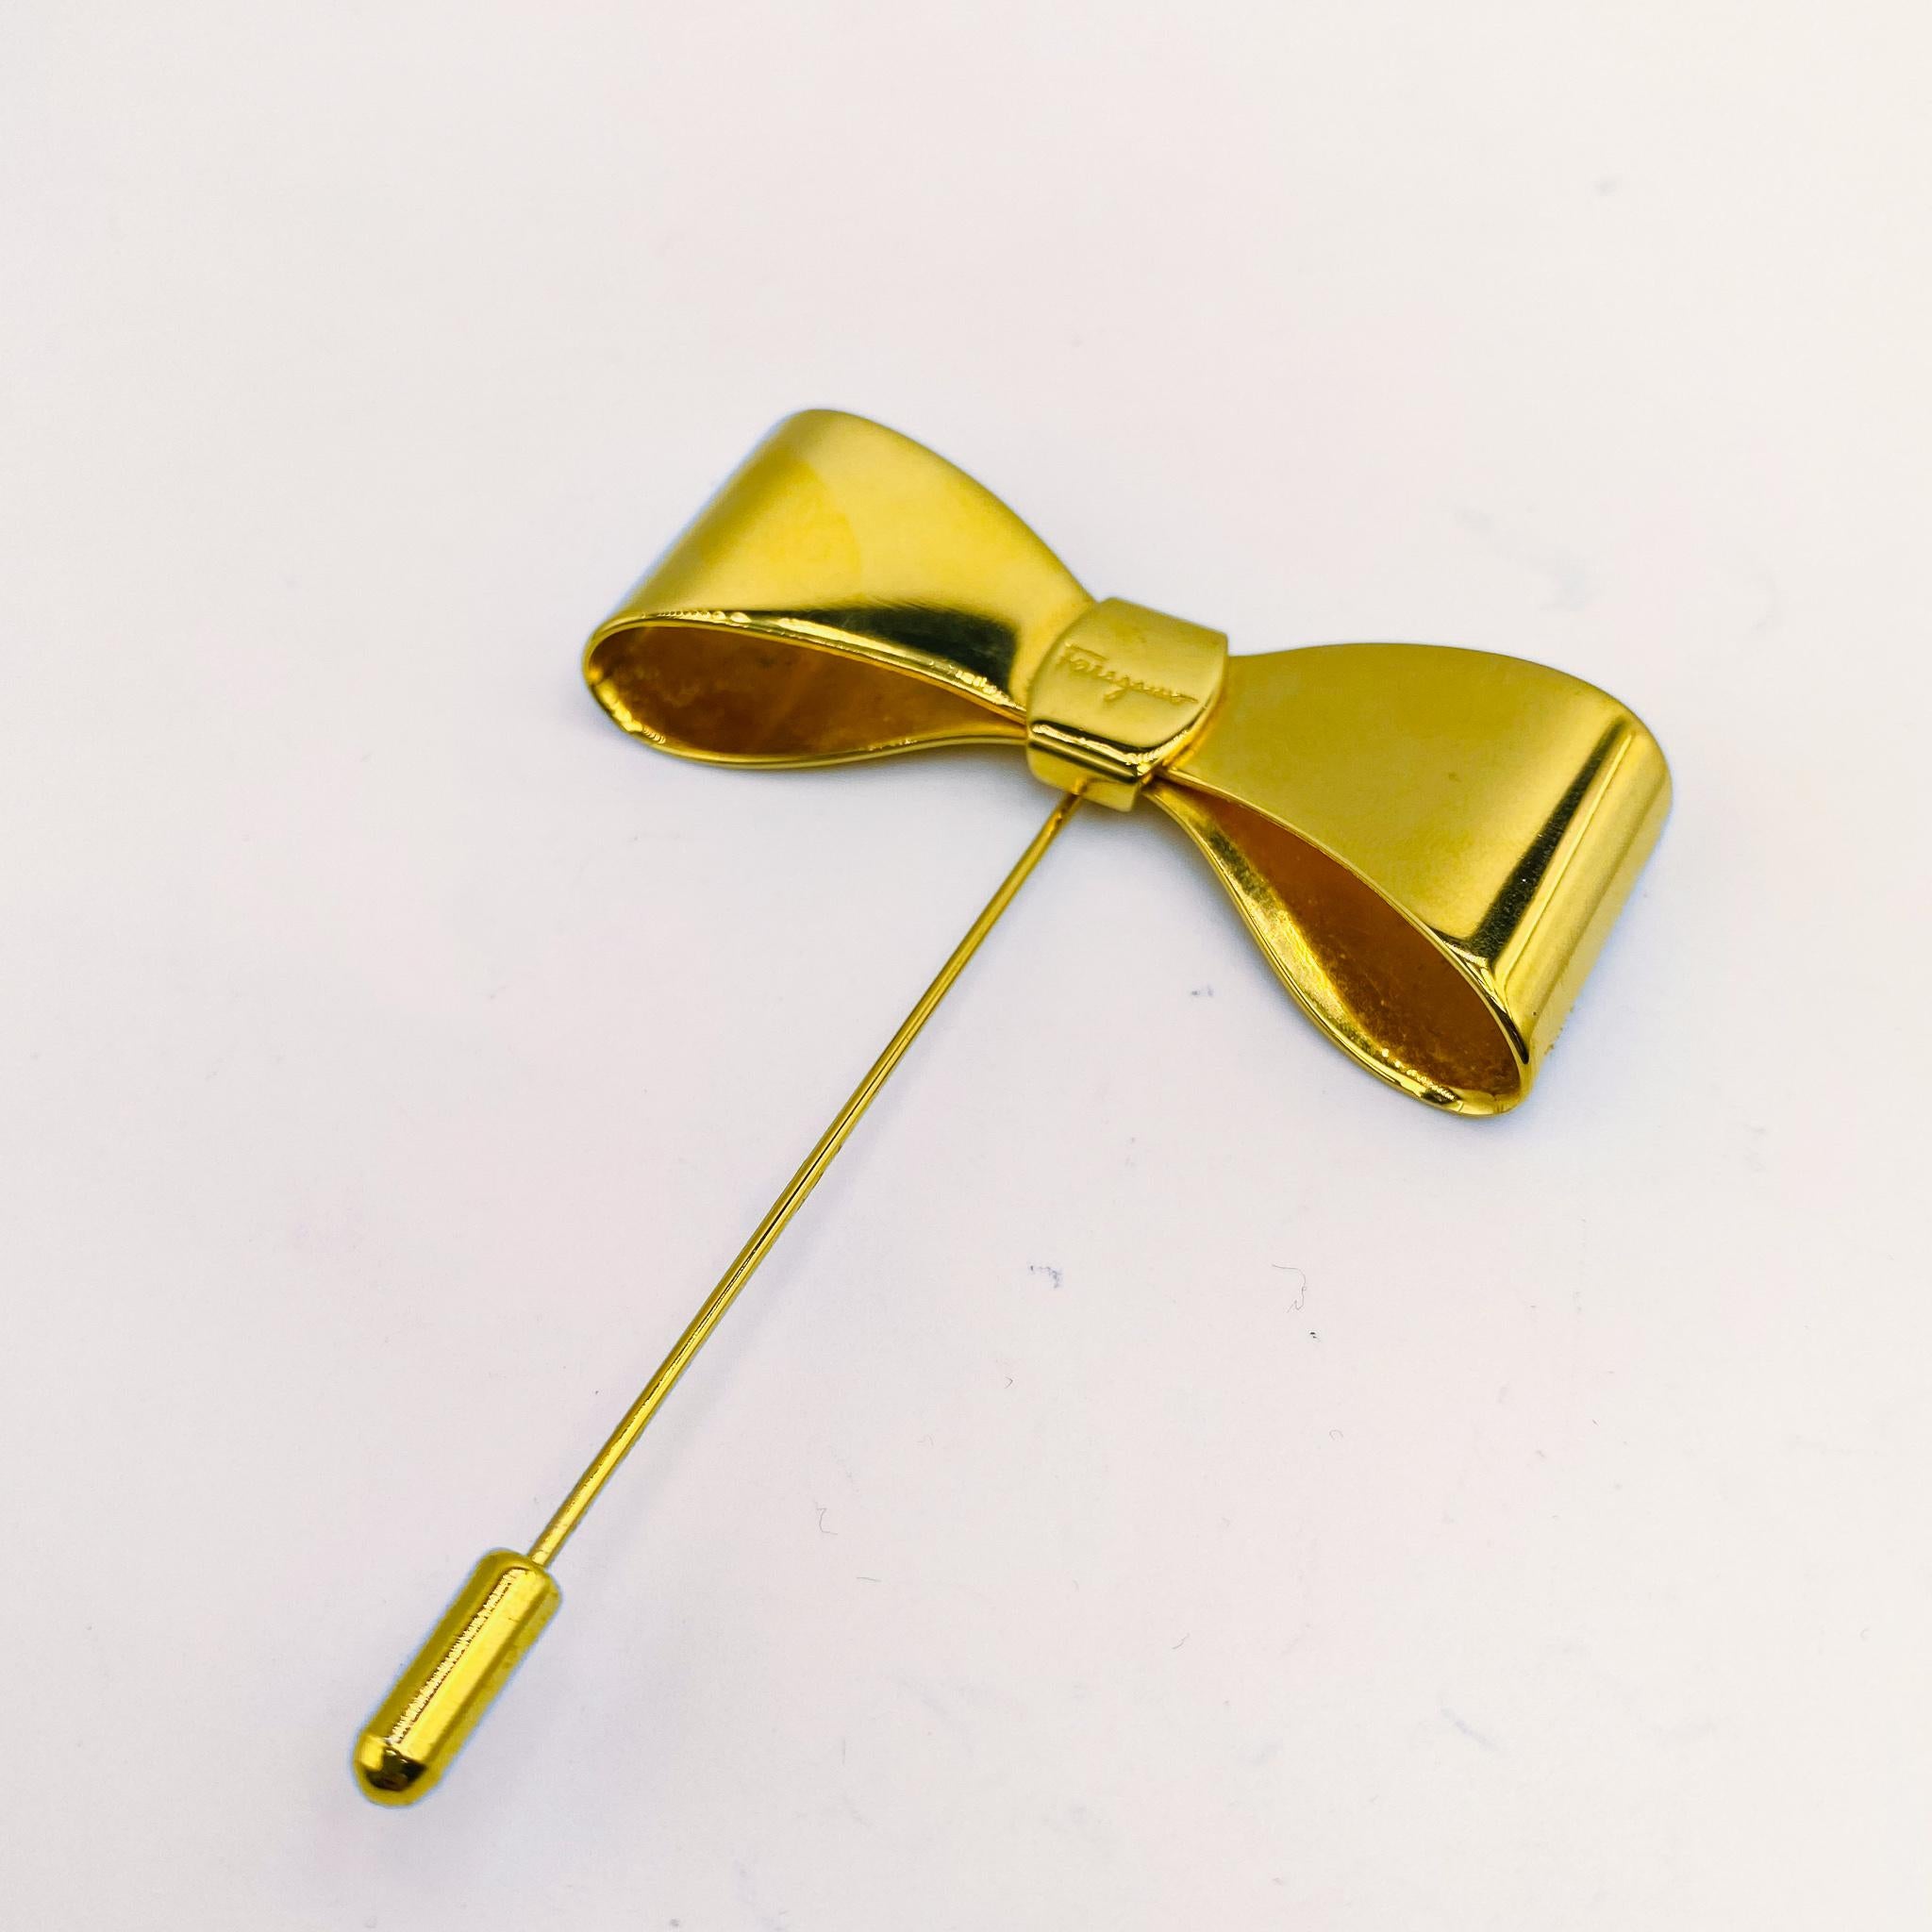 Vintage Salvatore Ferragamo Brooch 1990s

Gold plated brooch pin from the Italian designer Salvatore Ferragamo. Crafted in Italy from gold plated metal. Wear with your favourite jackets or shirts. 

Size & Fit
- 8.5cm long x 5.5cm wide

Authenticity